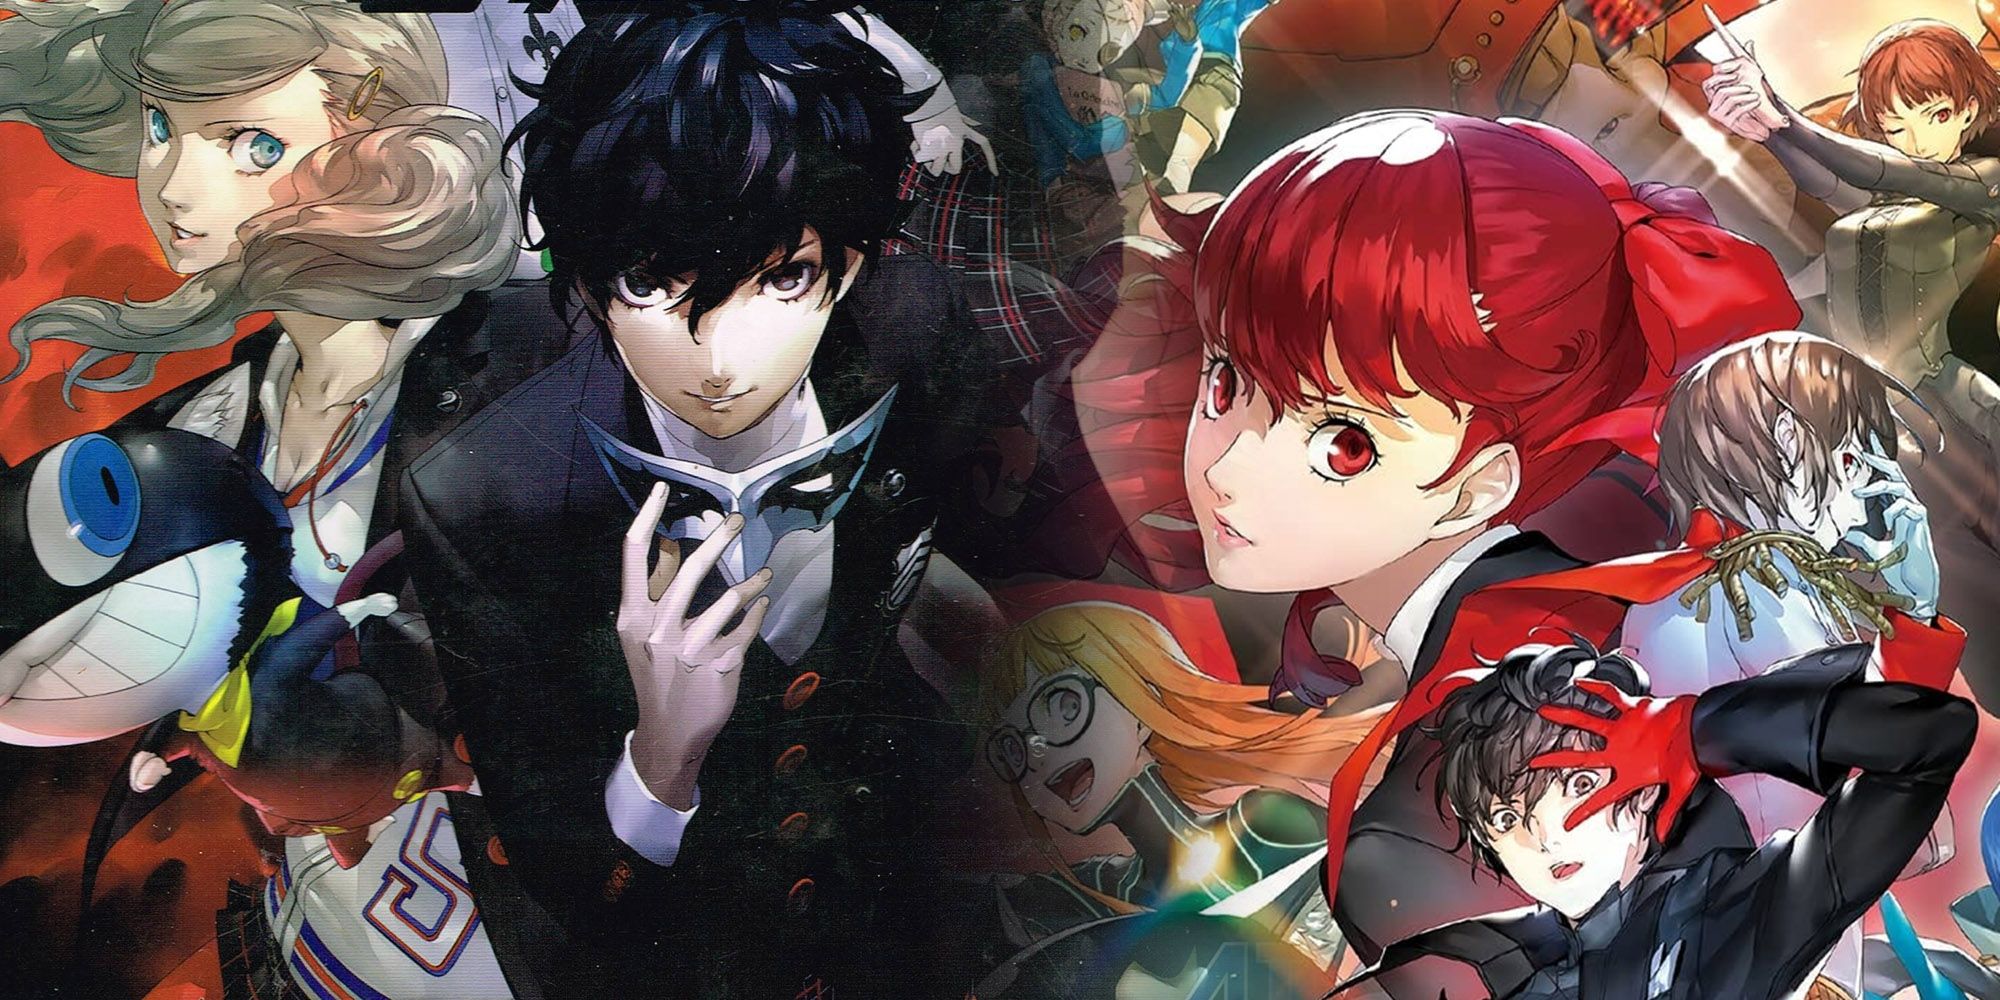 Persona 5 Cover Art Next To Persona 5 Royal Cover Art